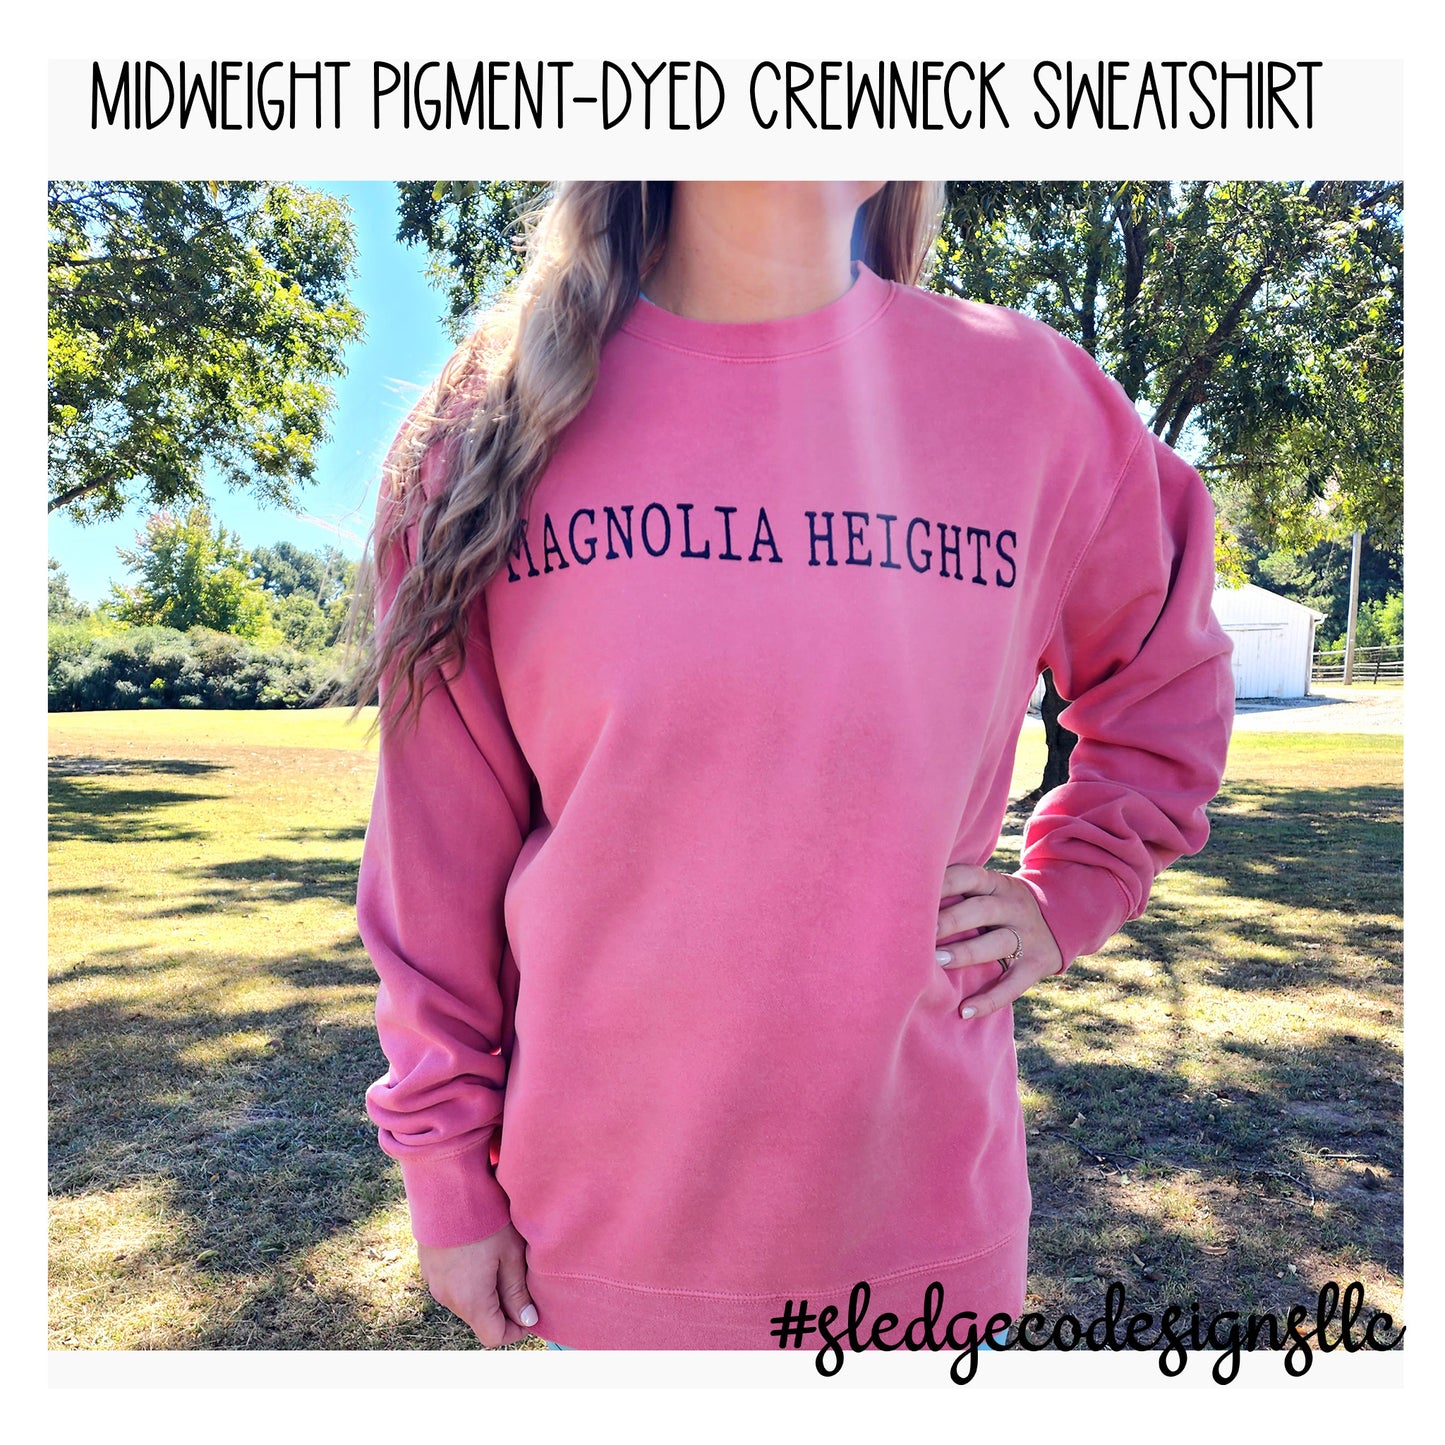 MAGNOLIA HEIGHTS CHIEFS | Independent Trading Co. - Midweight Pigment-Dyed Crewneck Sweatshirt